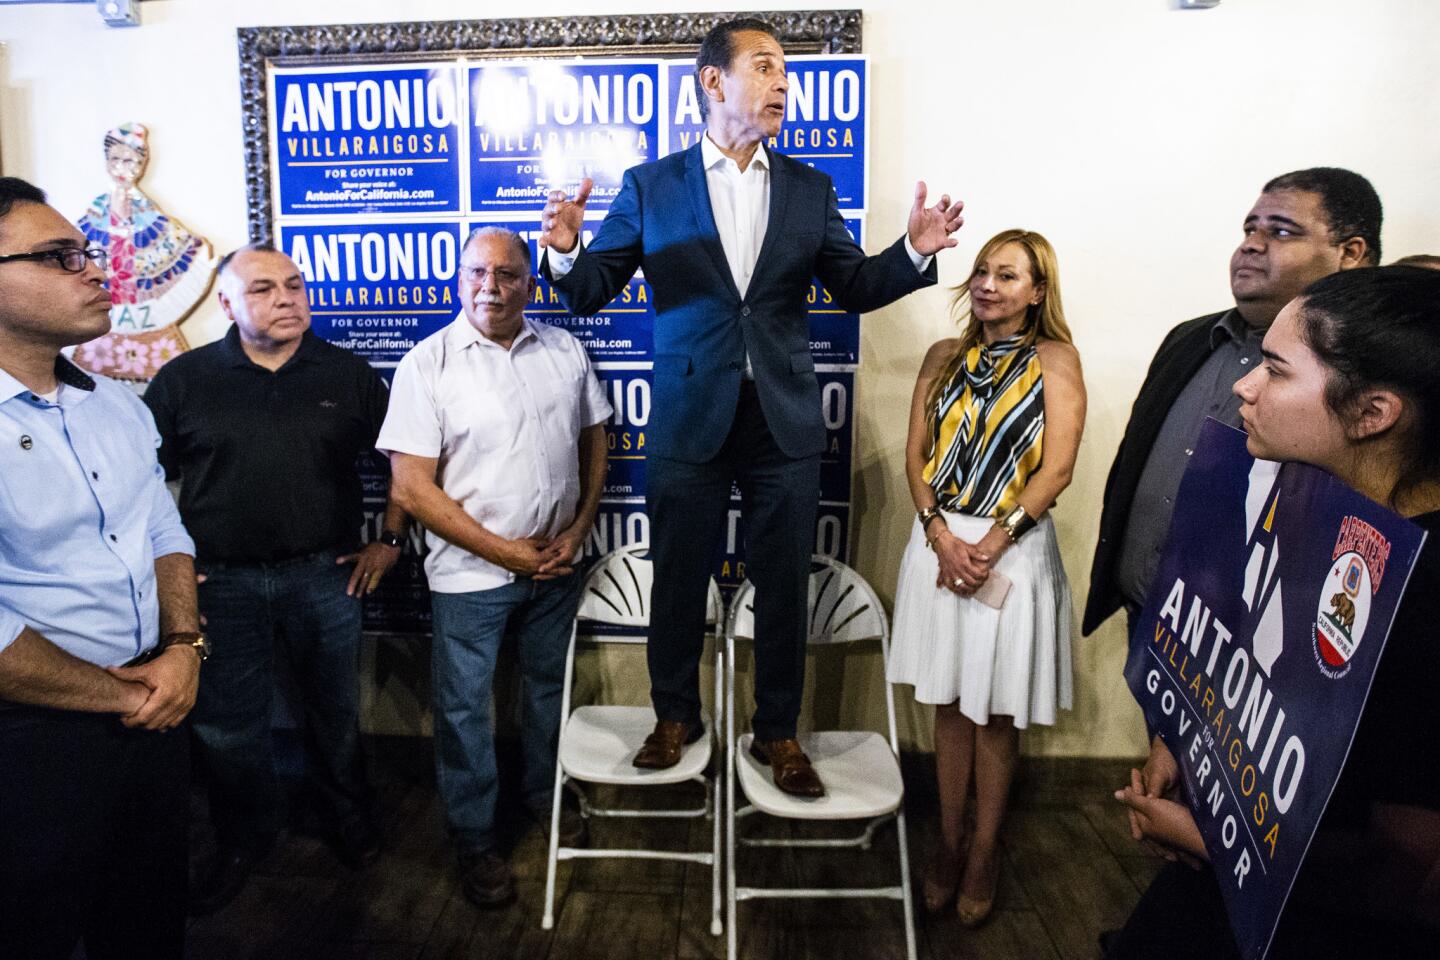 Gubernatorial candidate Antonio Villaraigosa, center, speaks at a campaign event with a carpenters union at a Riverside restaurant on Sunday.